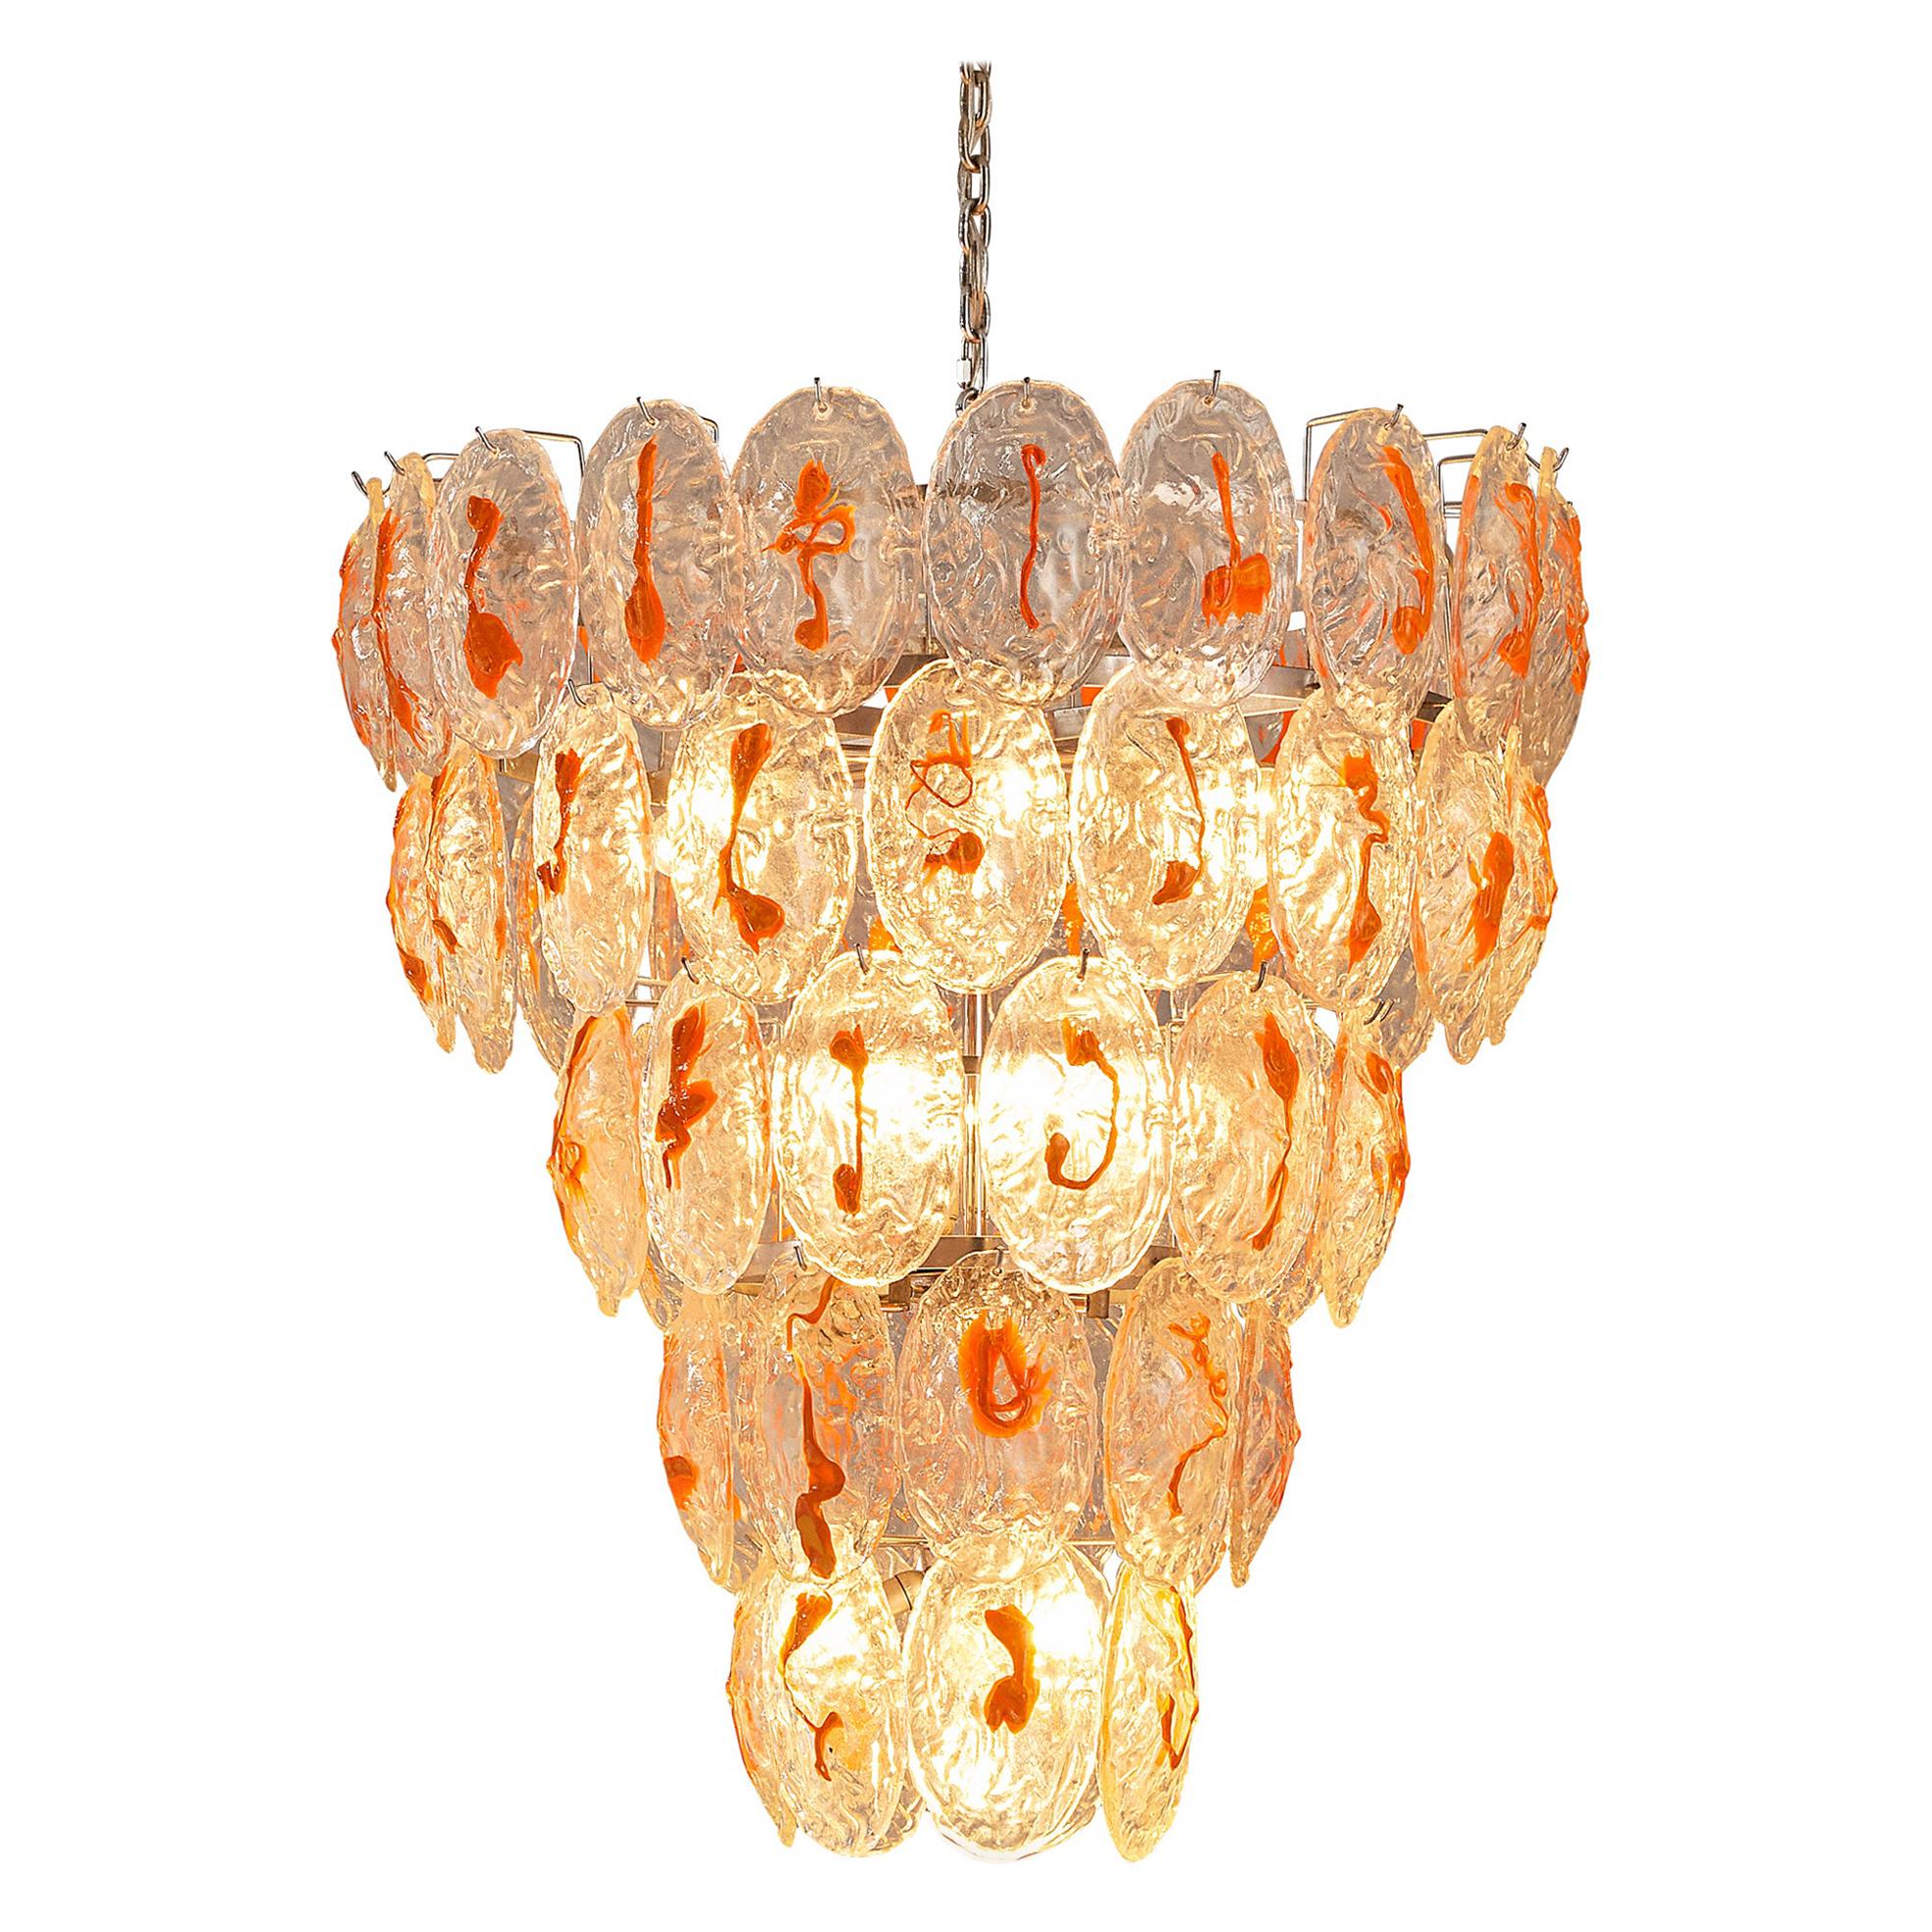 Italian Chandelier in Structured Glass with Orange Detailing